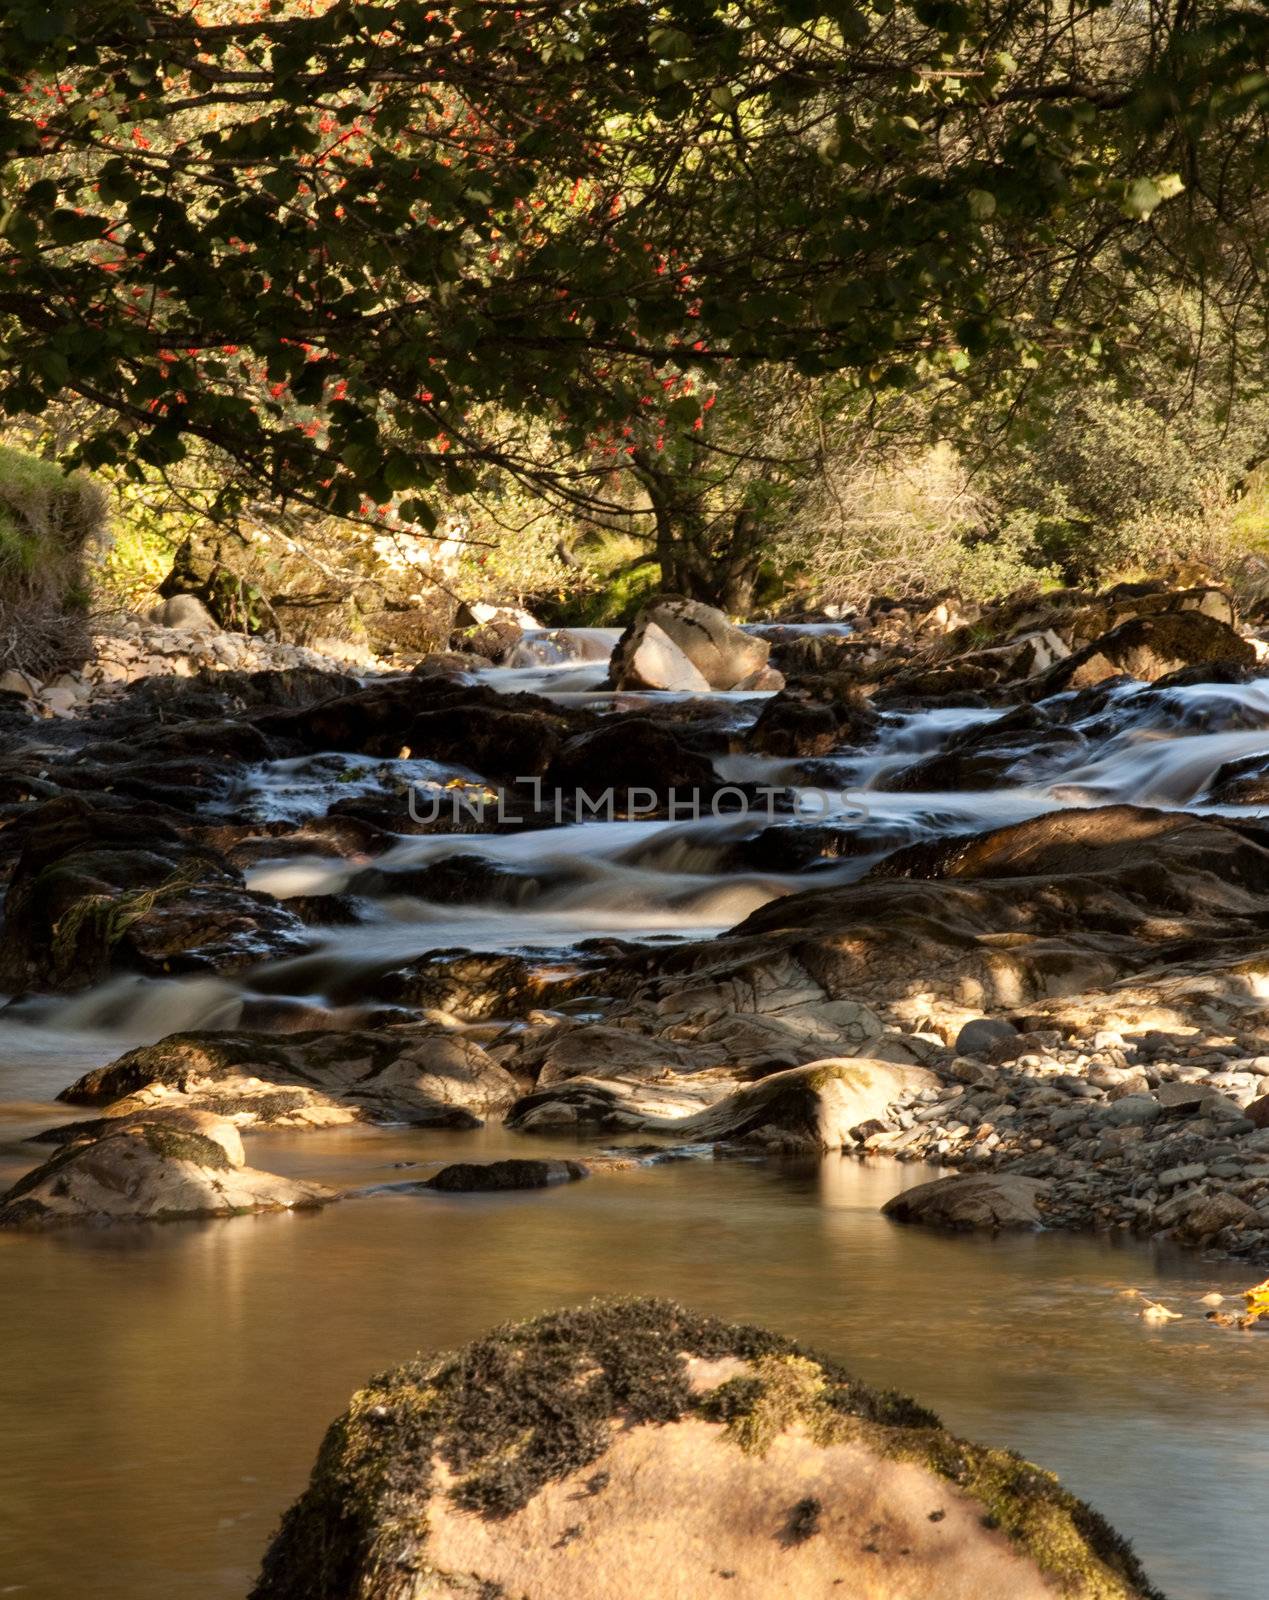 Slow motion water in small river by steheap